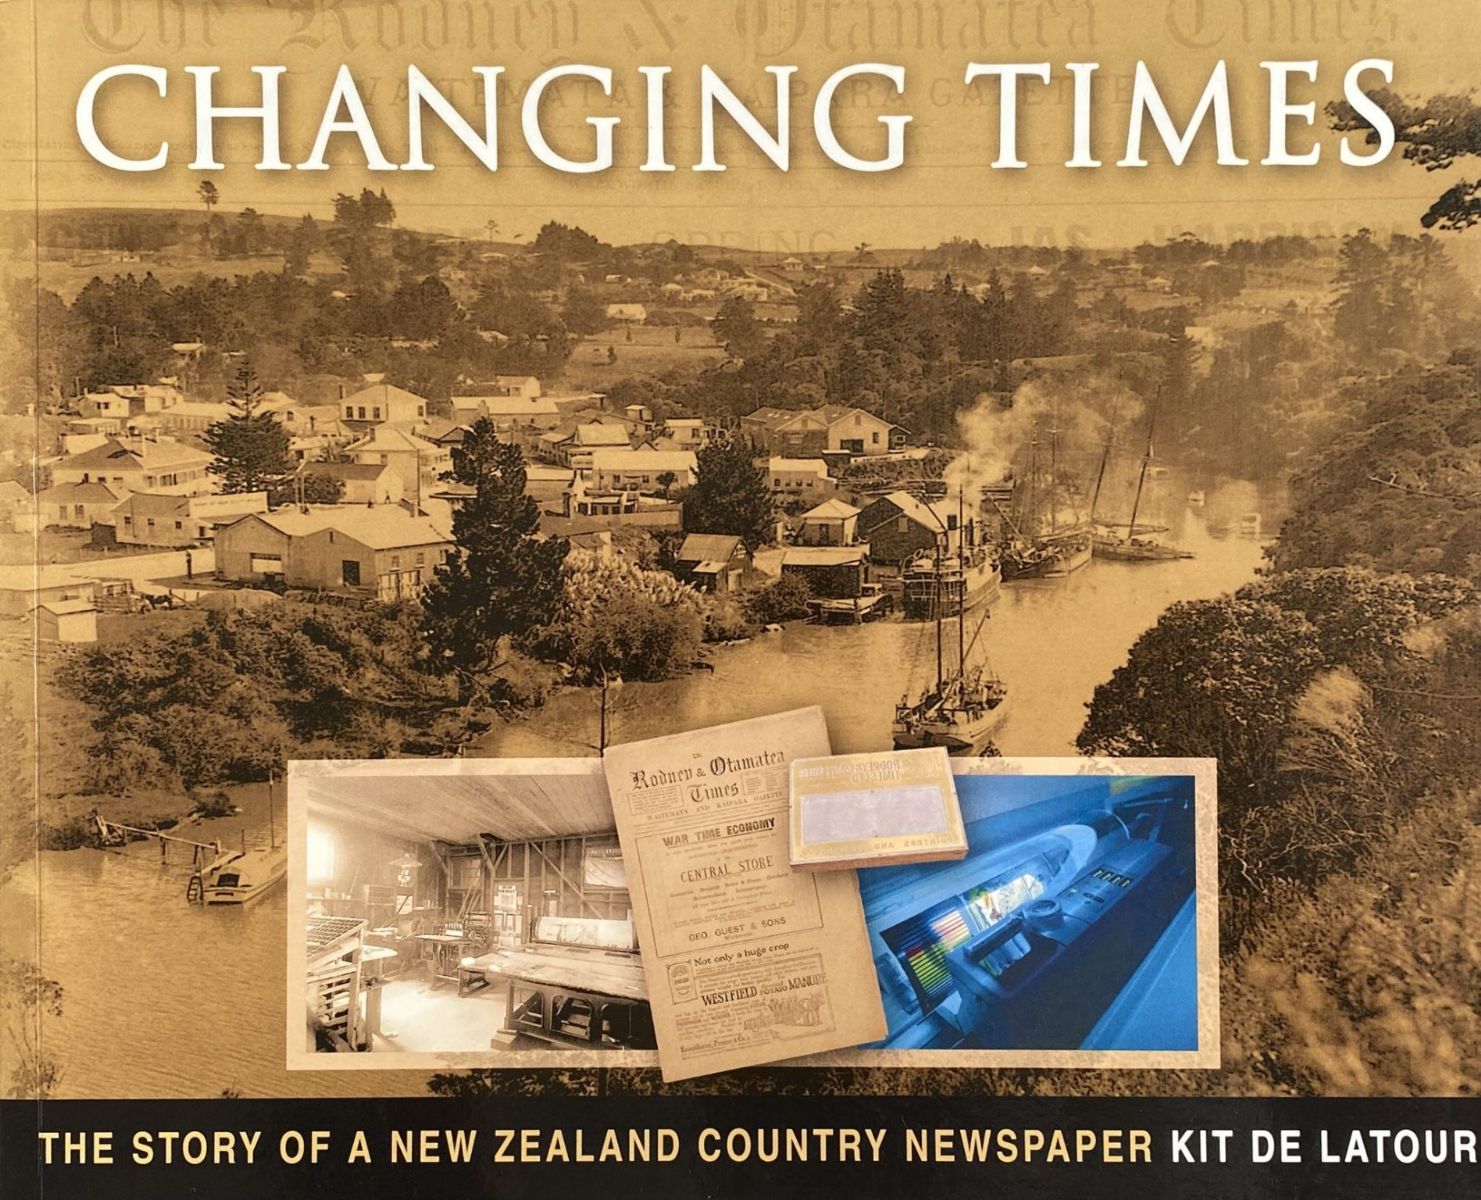 CHANGING TIMES: The Story of A New Zealand Country Newspaper